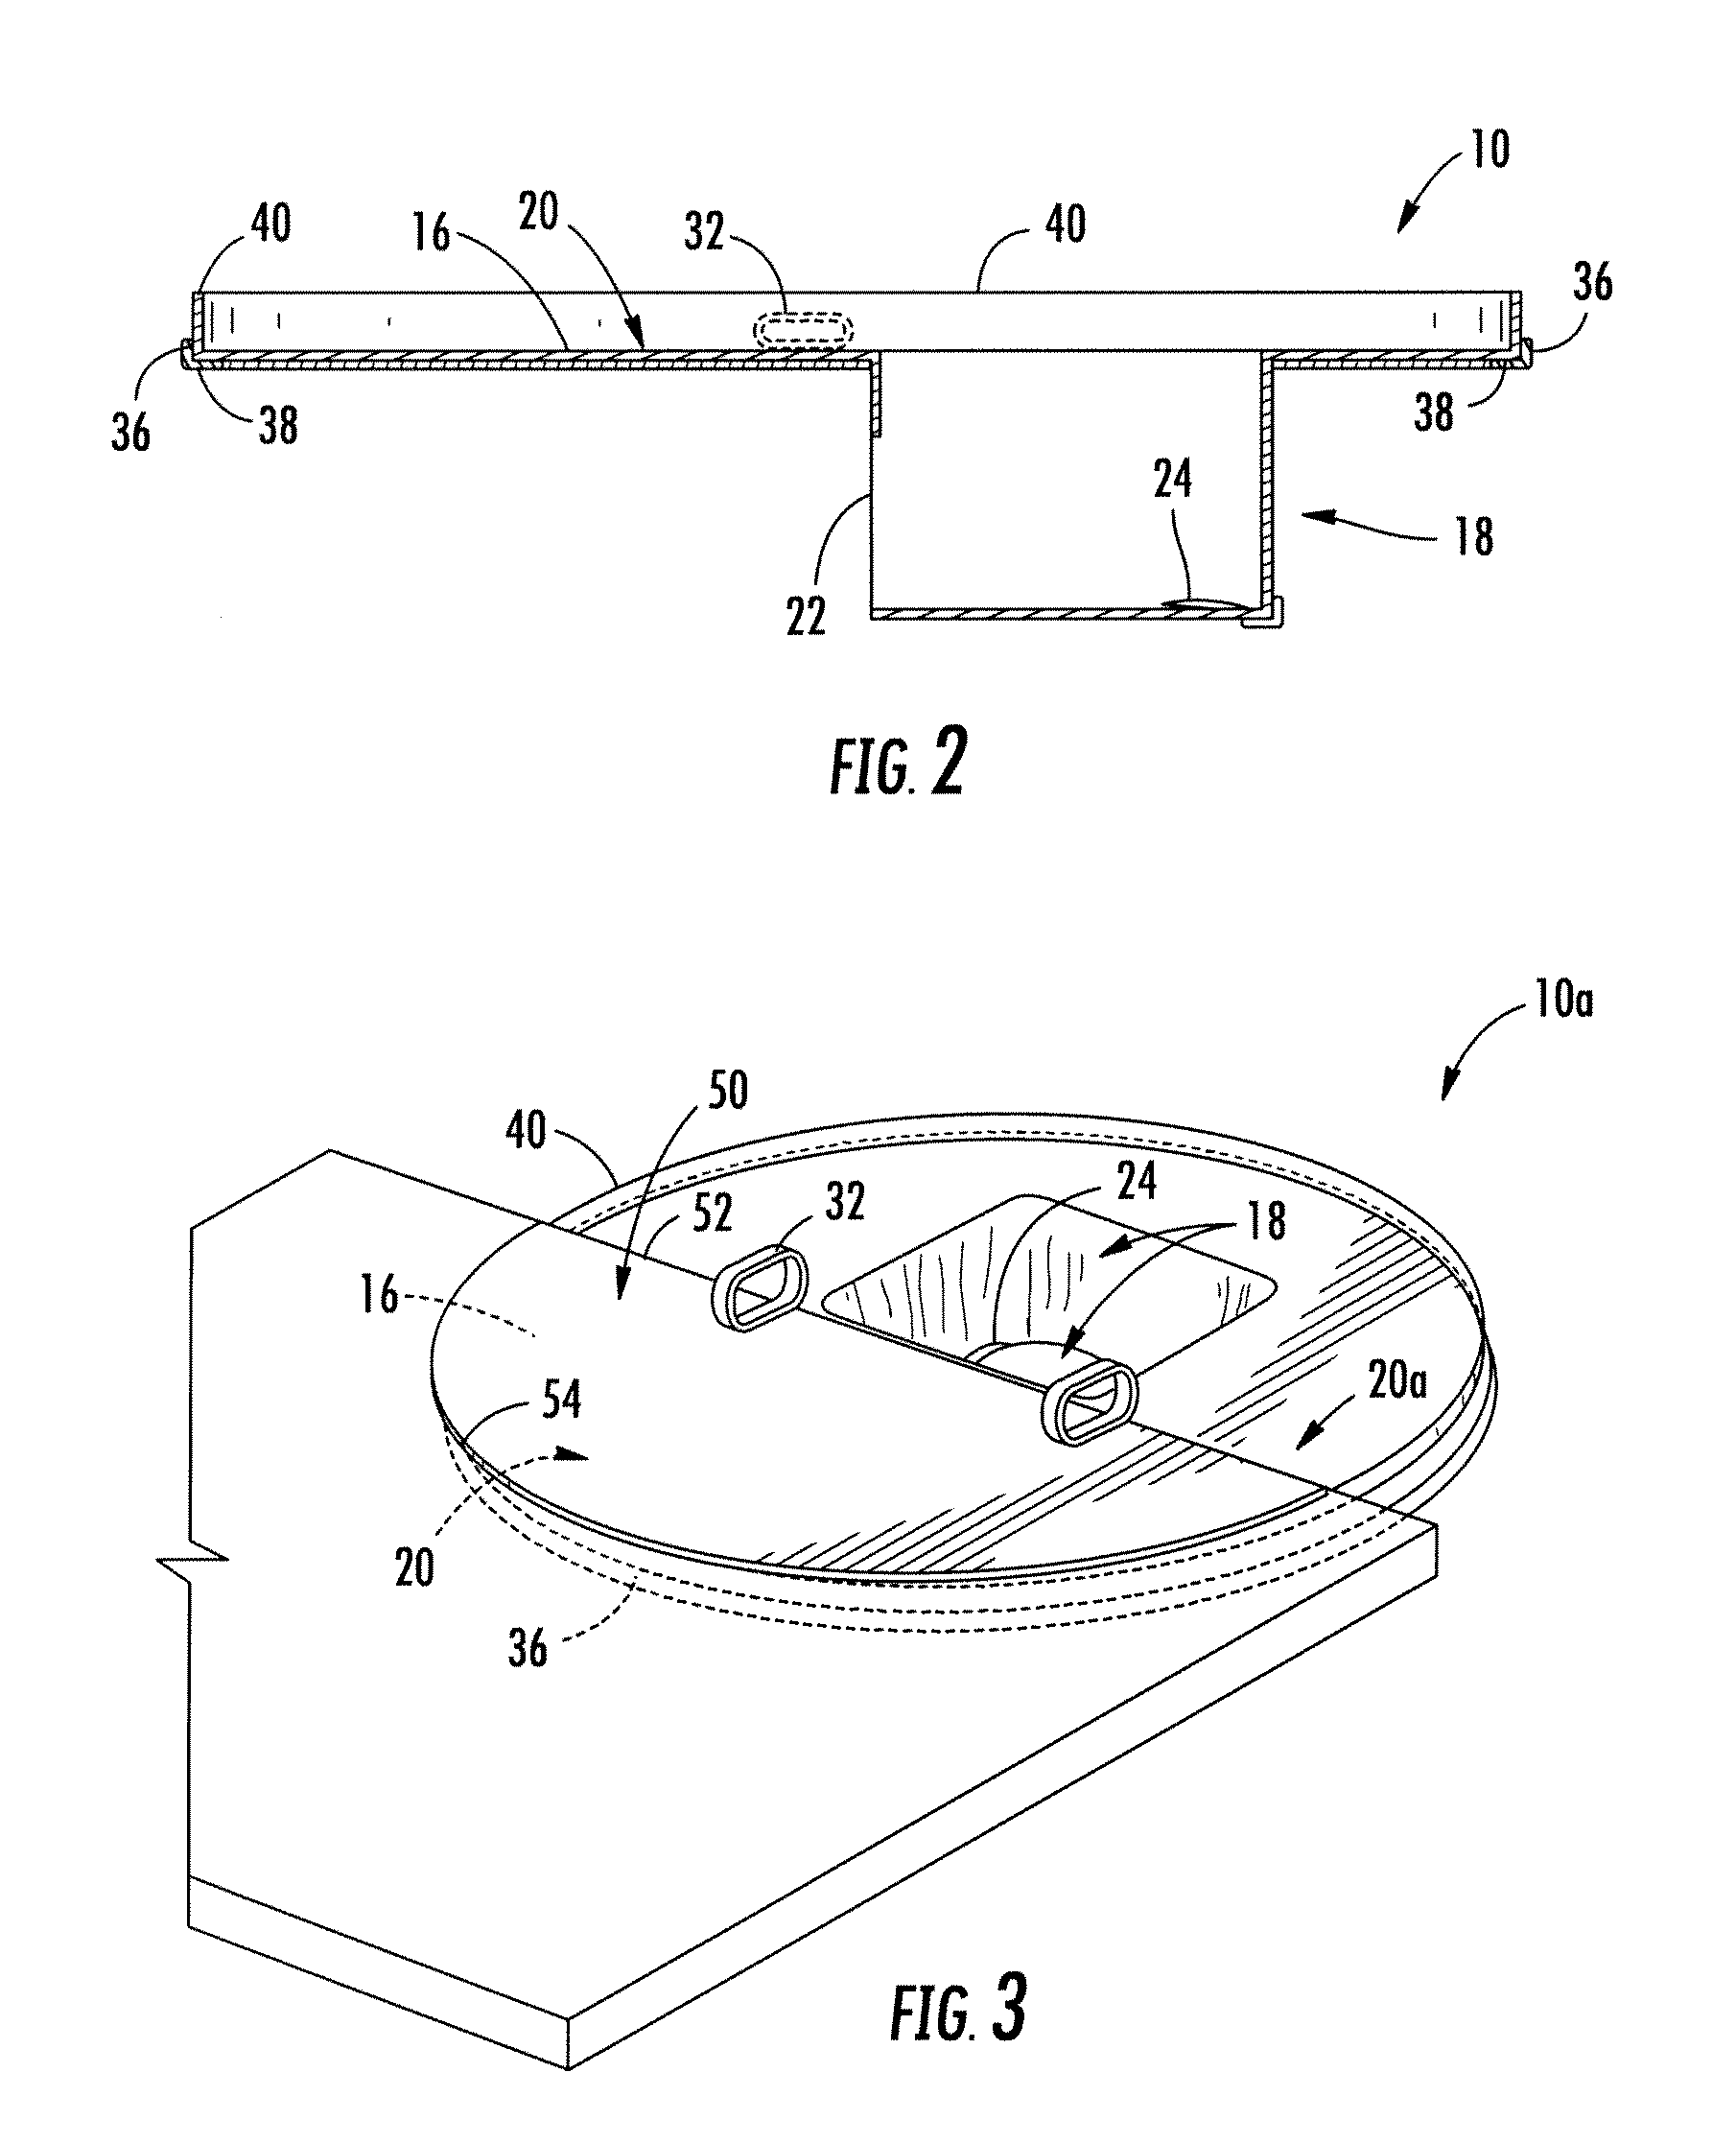 Tray apparatus and methods of making and using same